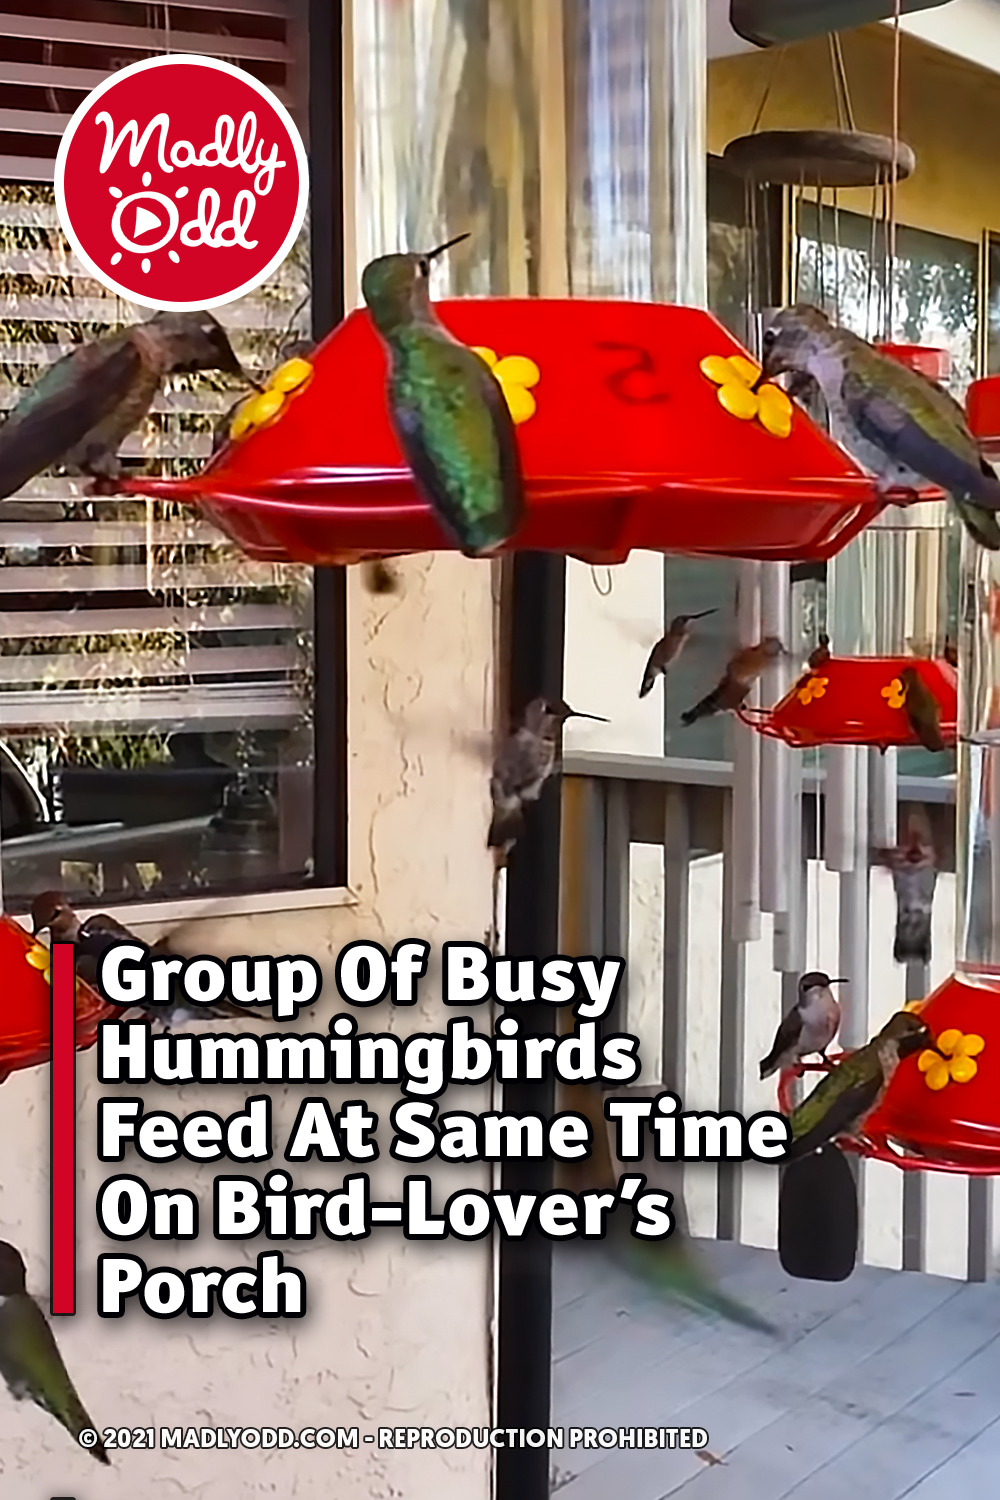 Group Of Busy Hummingbirds Feed At Same Time On Bird-Lover’s Porch